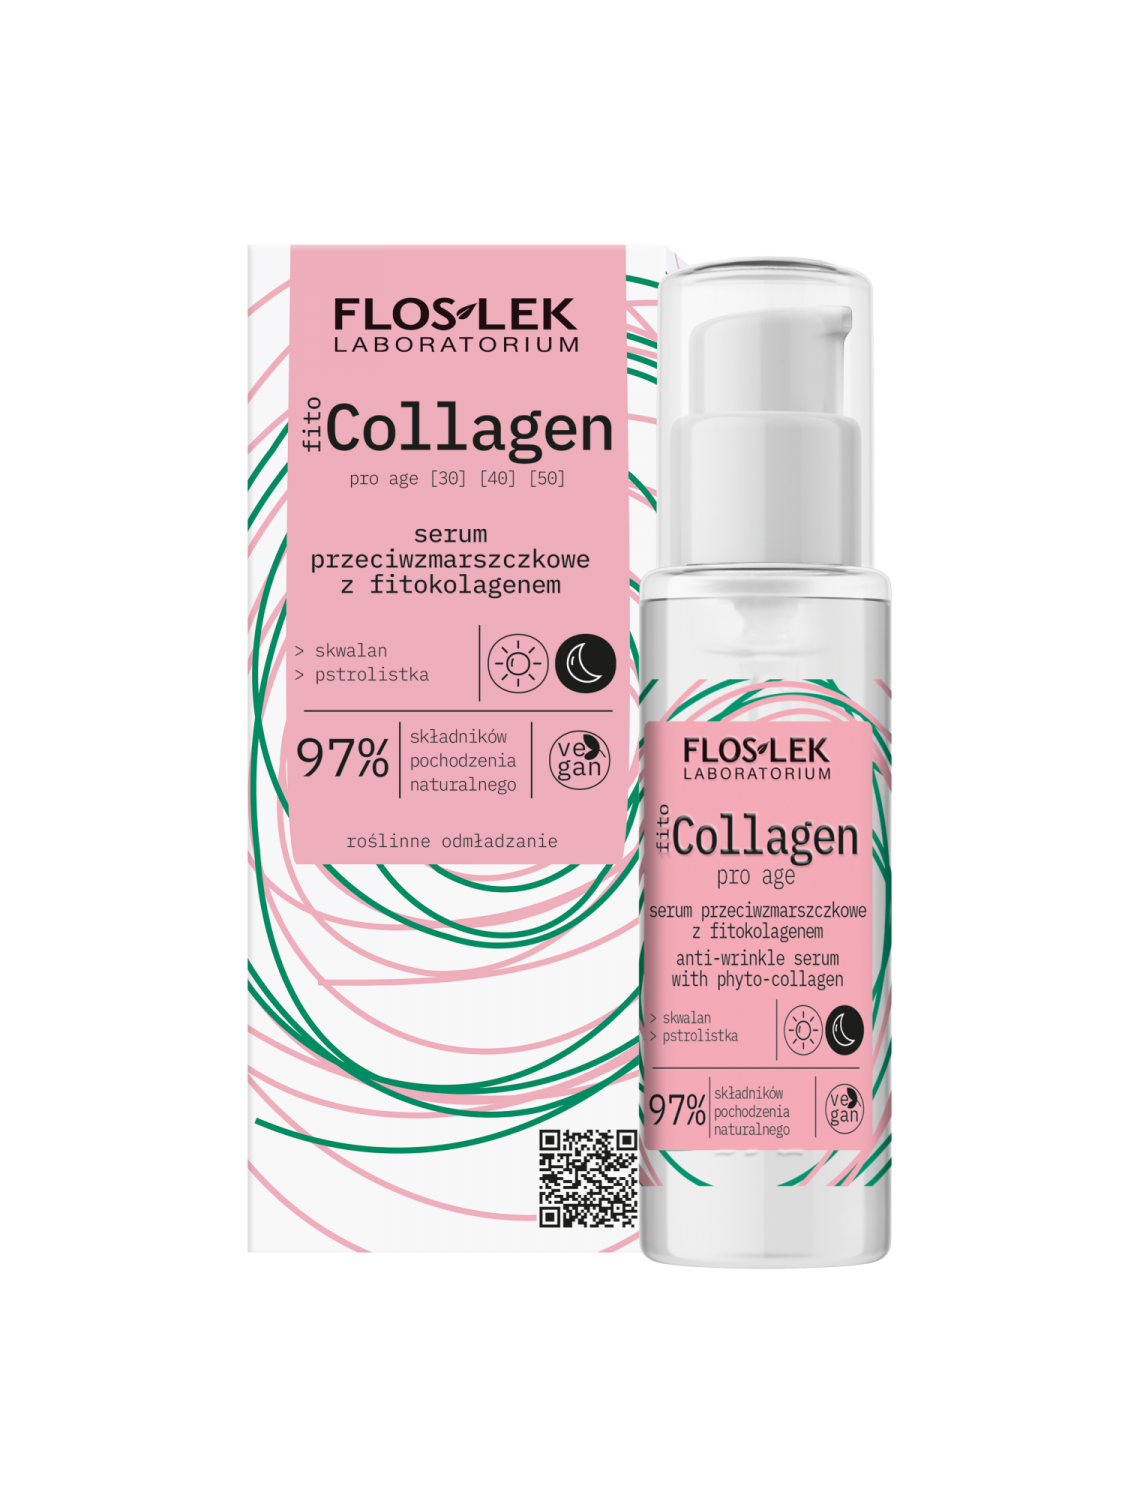 fitoCOLLAGEN pro age Anti-wrinkle serum with phyto-collagen 30 ml - Floslek